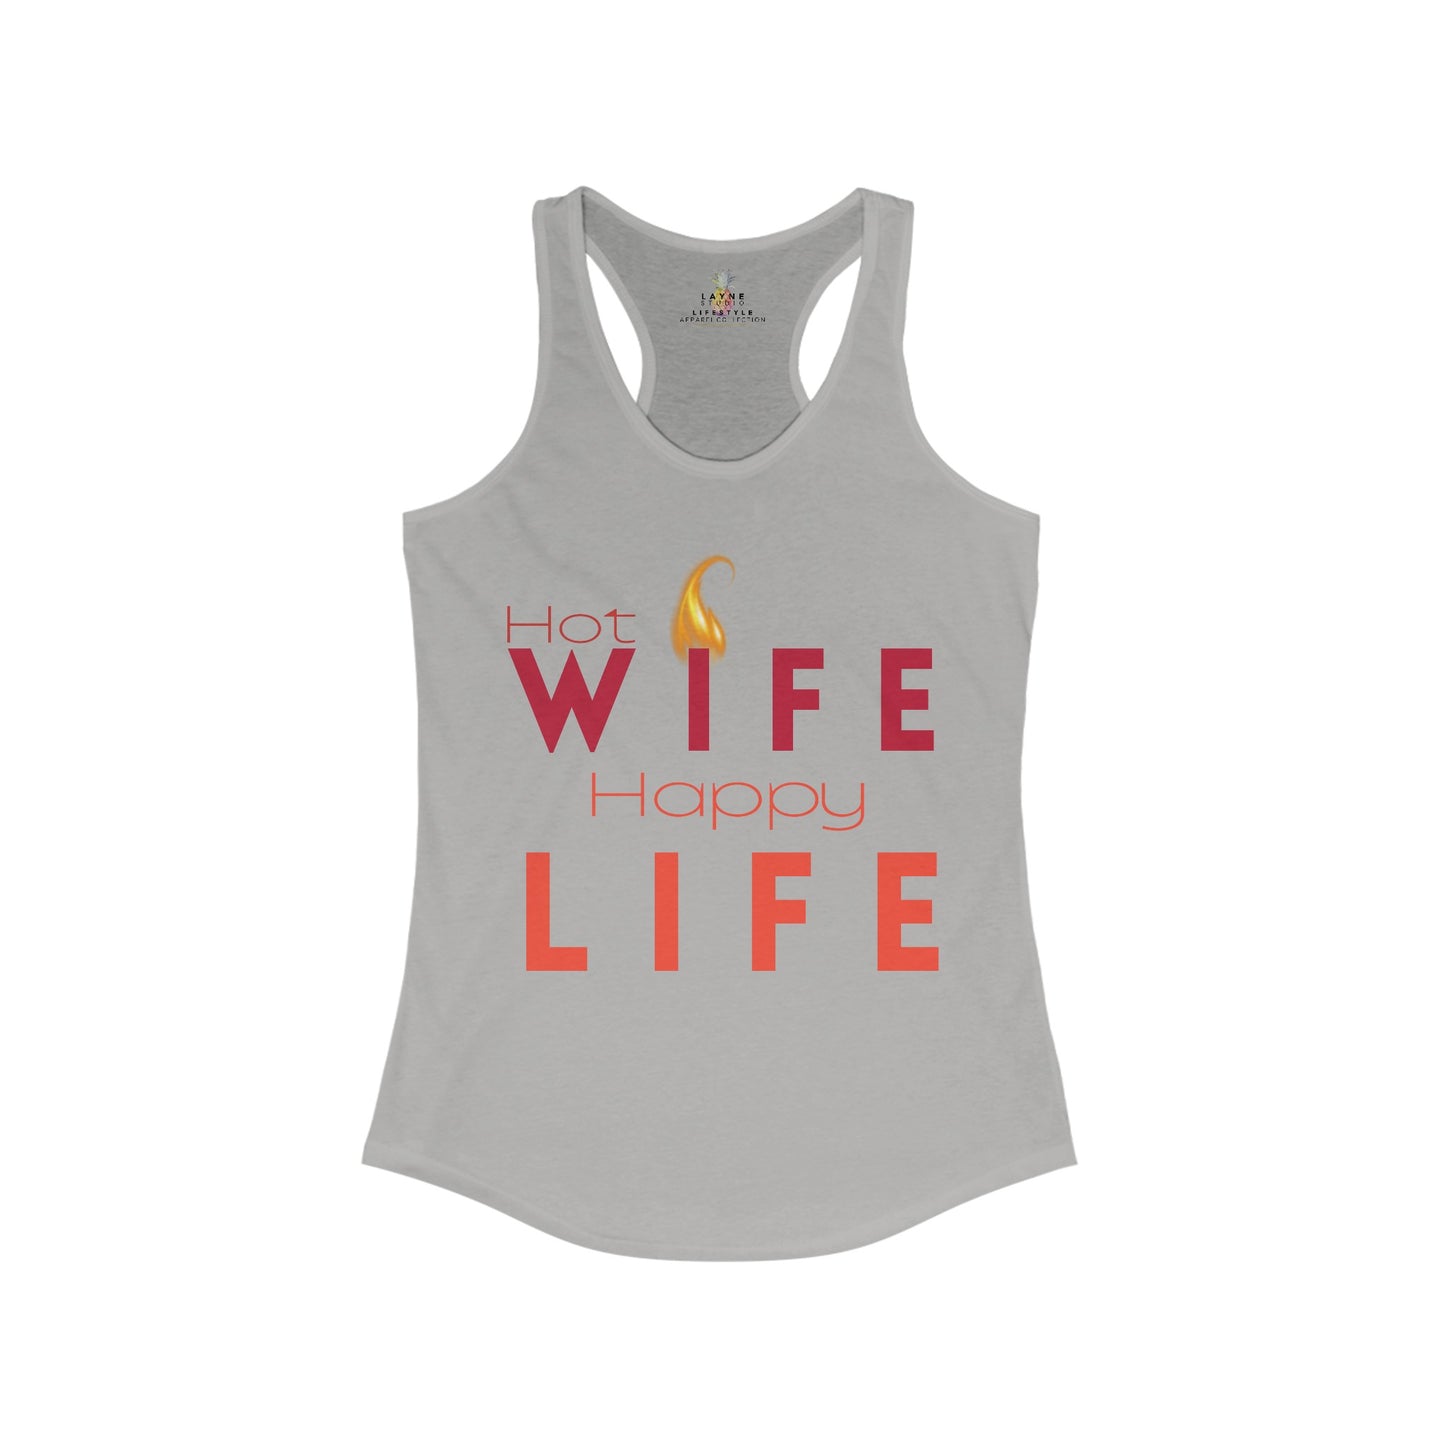 Front View of Layne Studios "Hot Wife Happy Life" Graphic Heather Gray Racerback Tank-Top